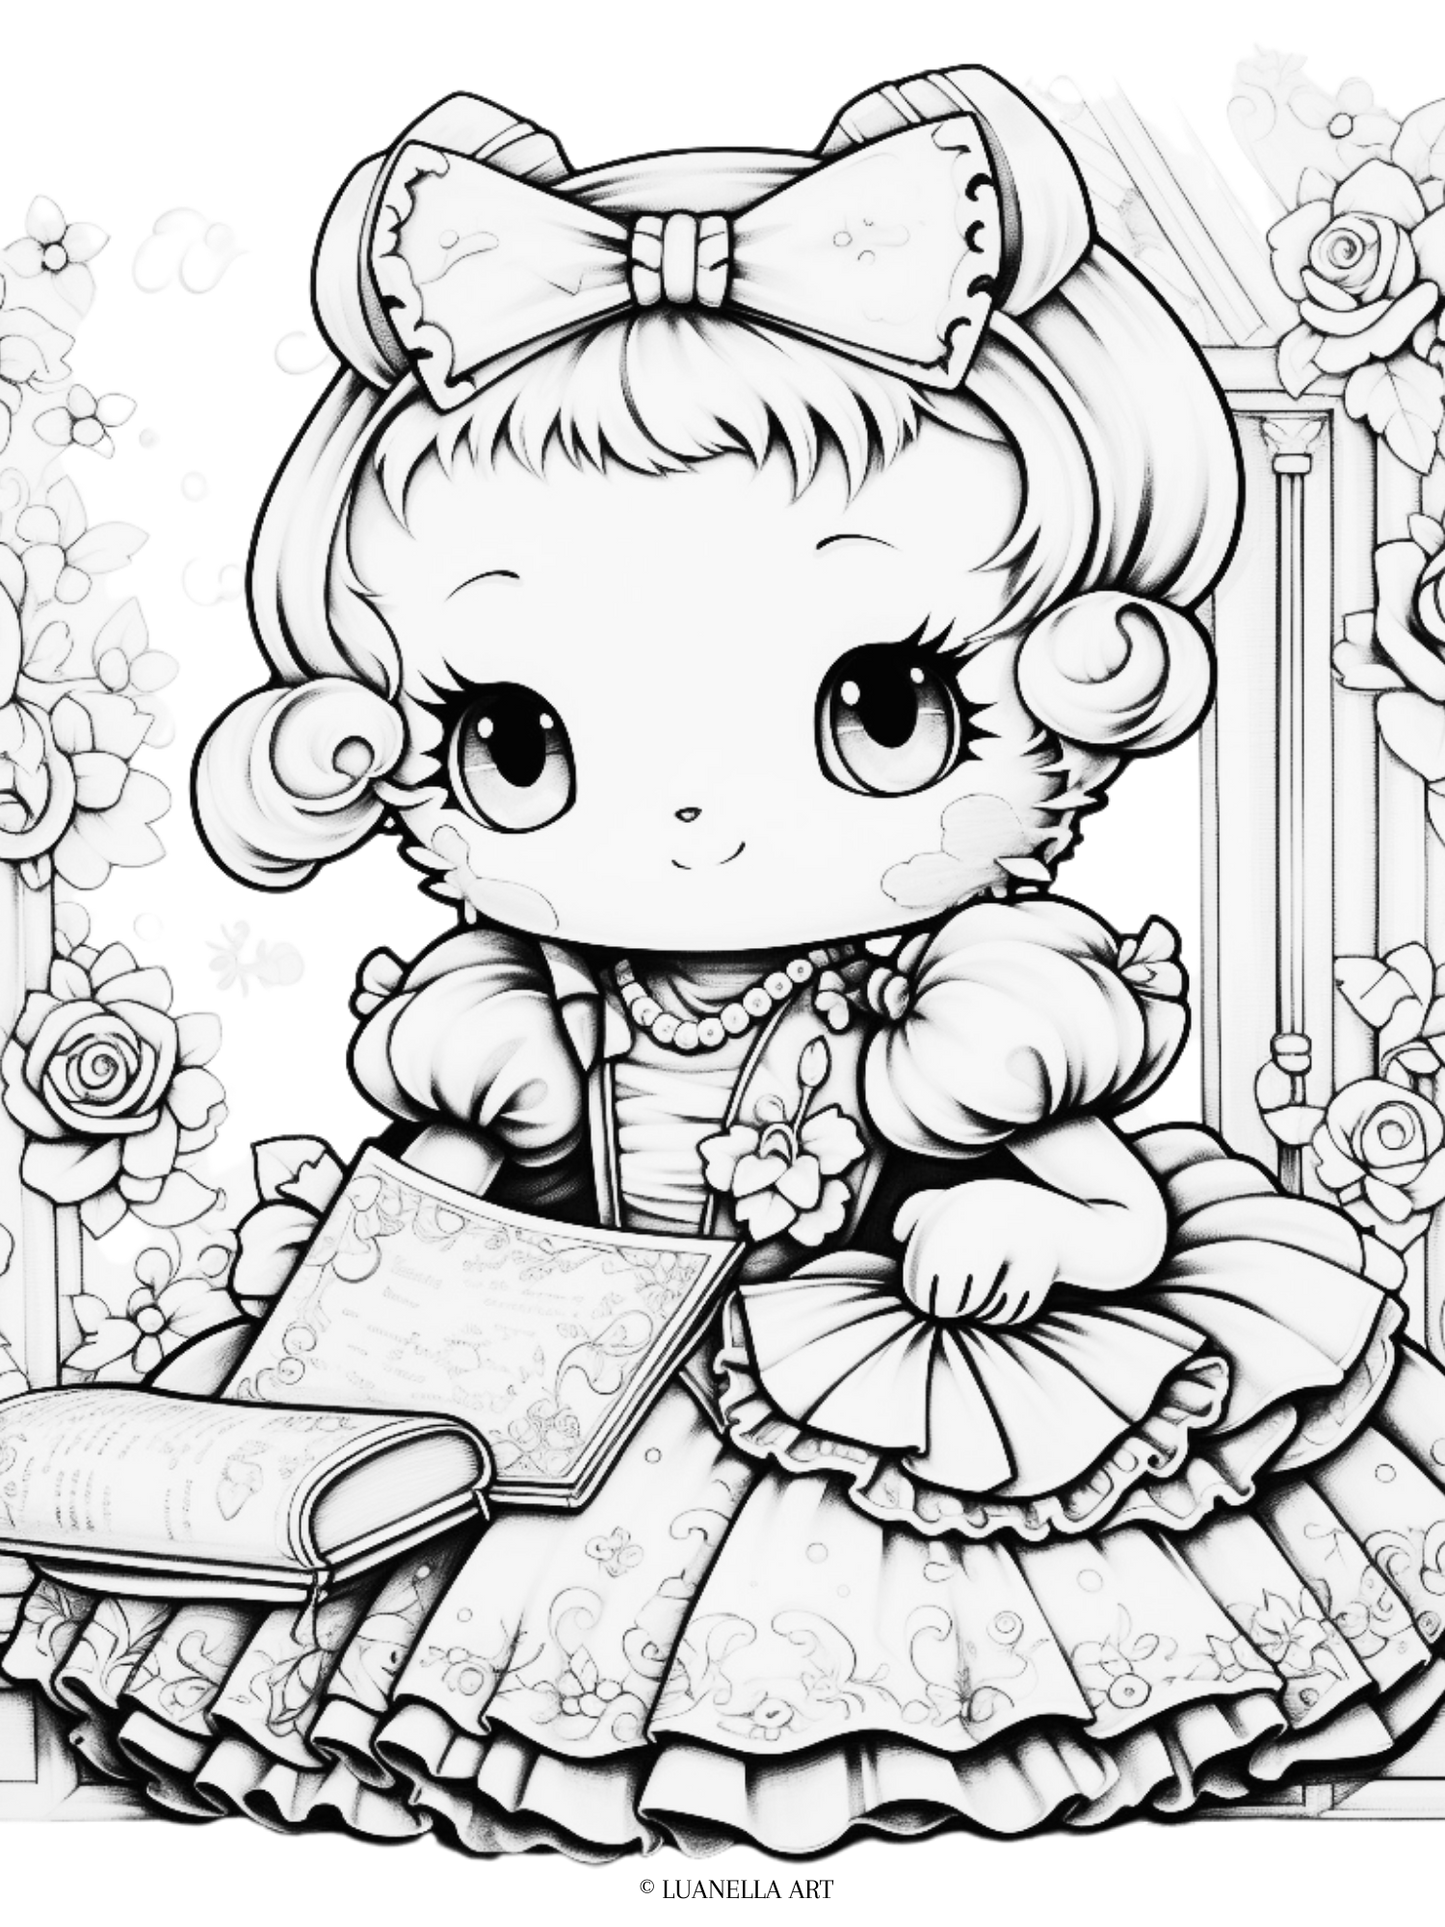 Confident Sanrio girl in ballgown | Coloring Page | Instant Digital Download